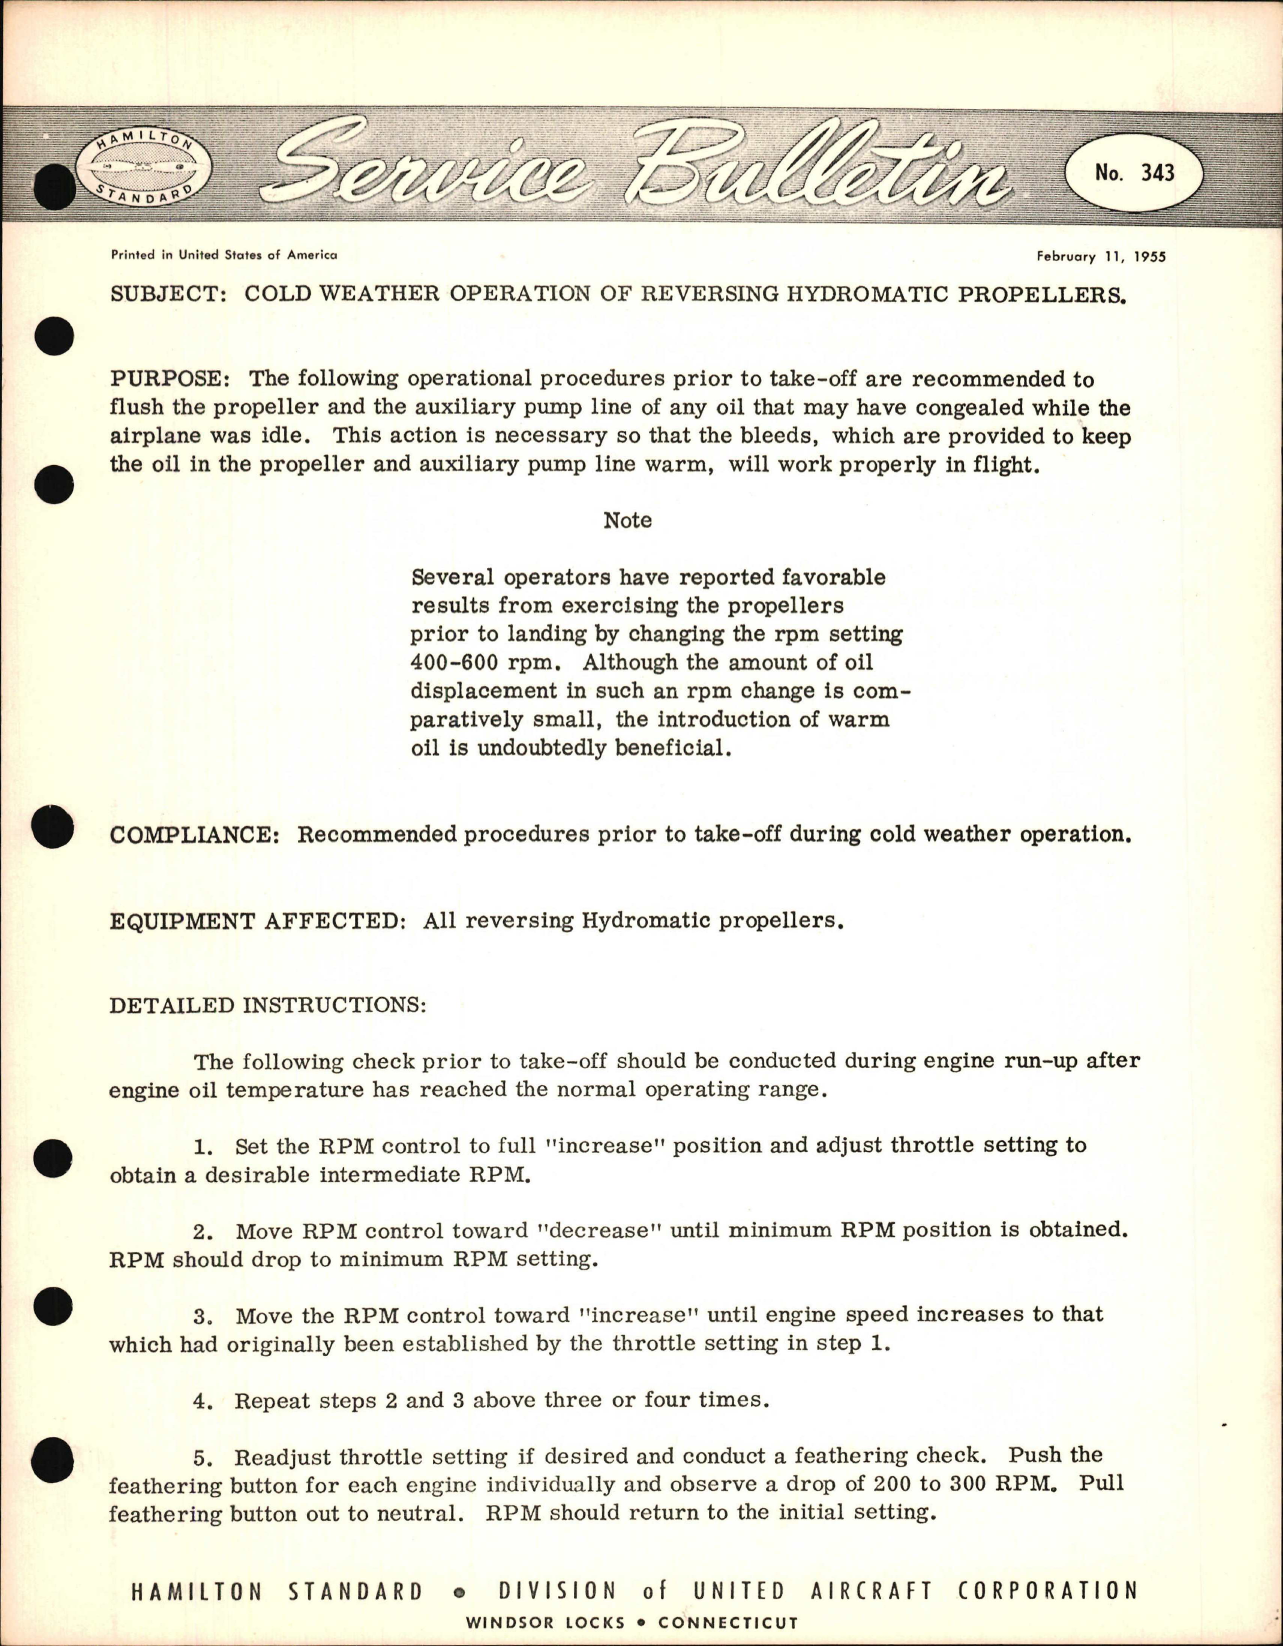 Sample page 1 from AirCorps Library document: Cold Weather Operation of Reversing Hydromatic Propellers